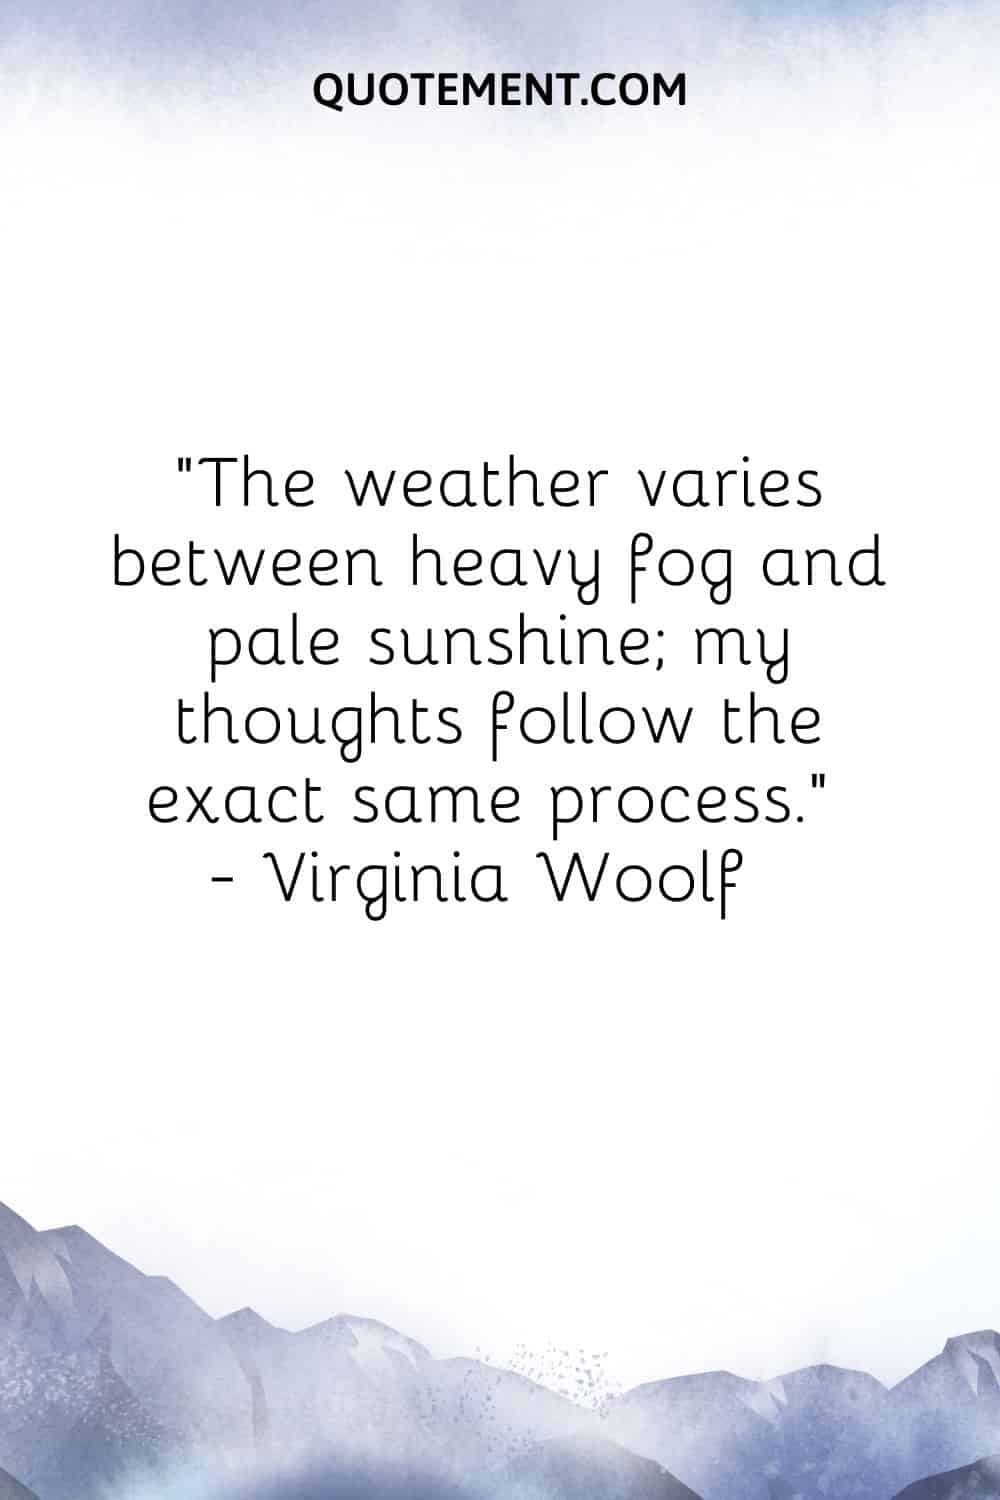 fog in mountains image representing foggy weather quote